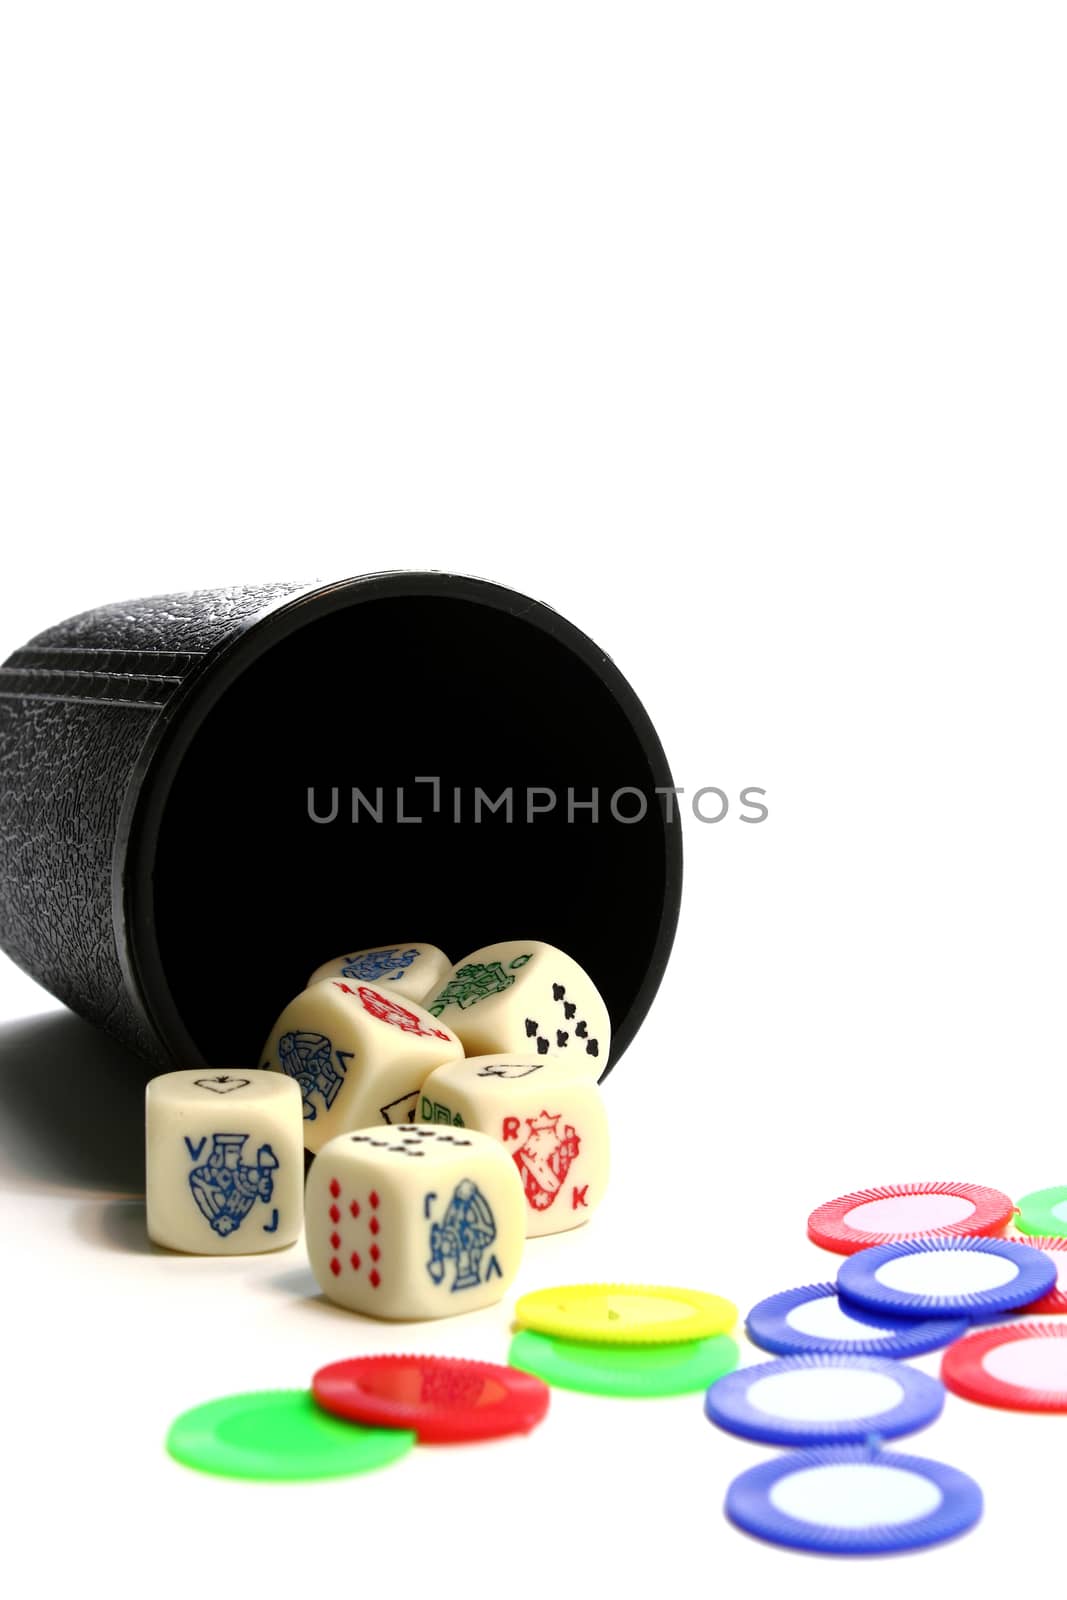 A cup throwing dice and colorful chips isolated